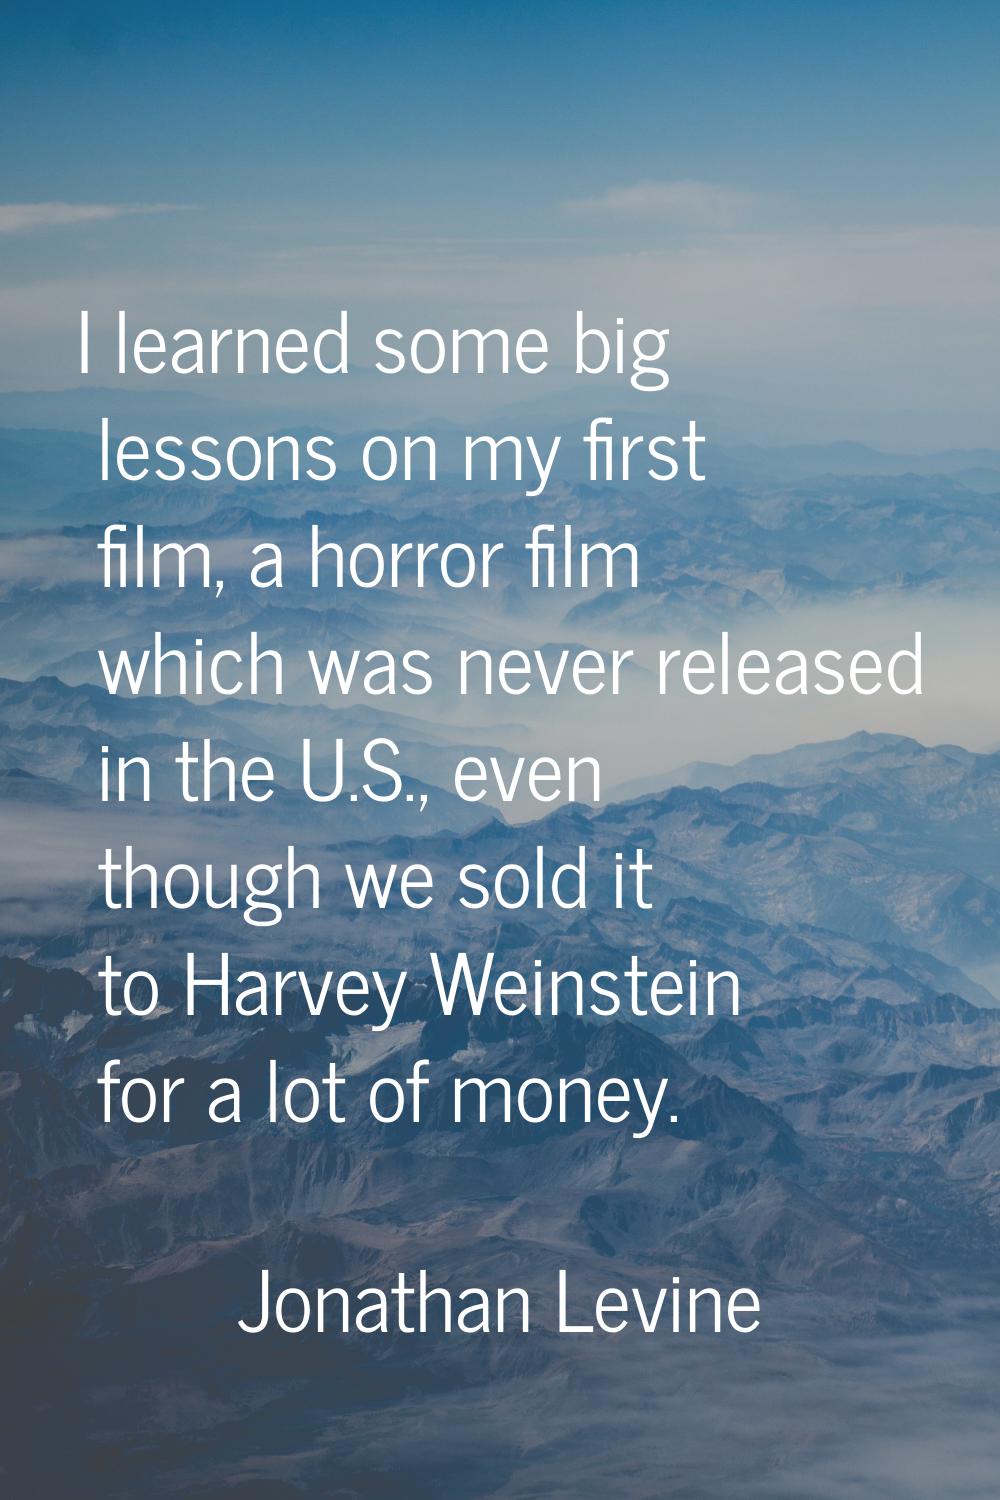 I learned some big lessons on my first film, a horror film which was never released in the U.S., ev